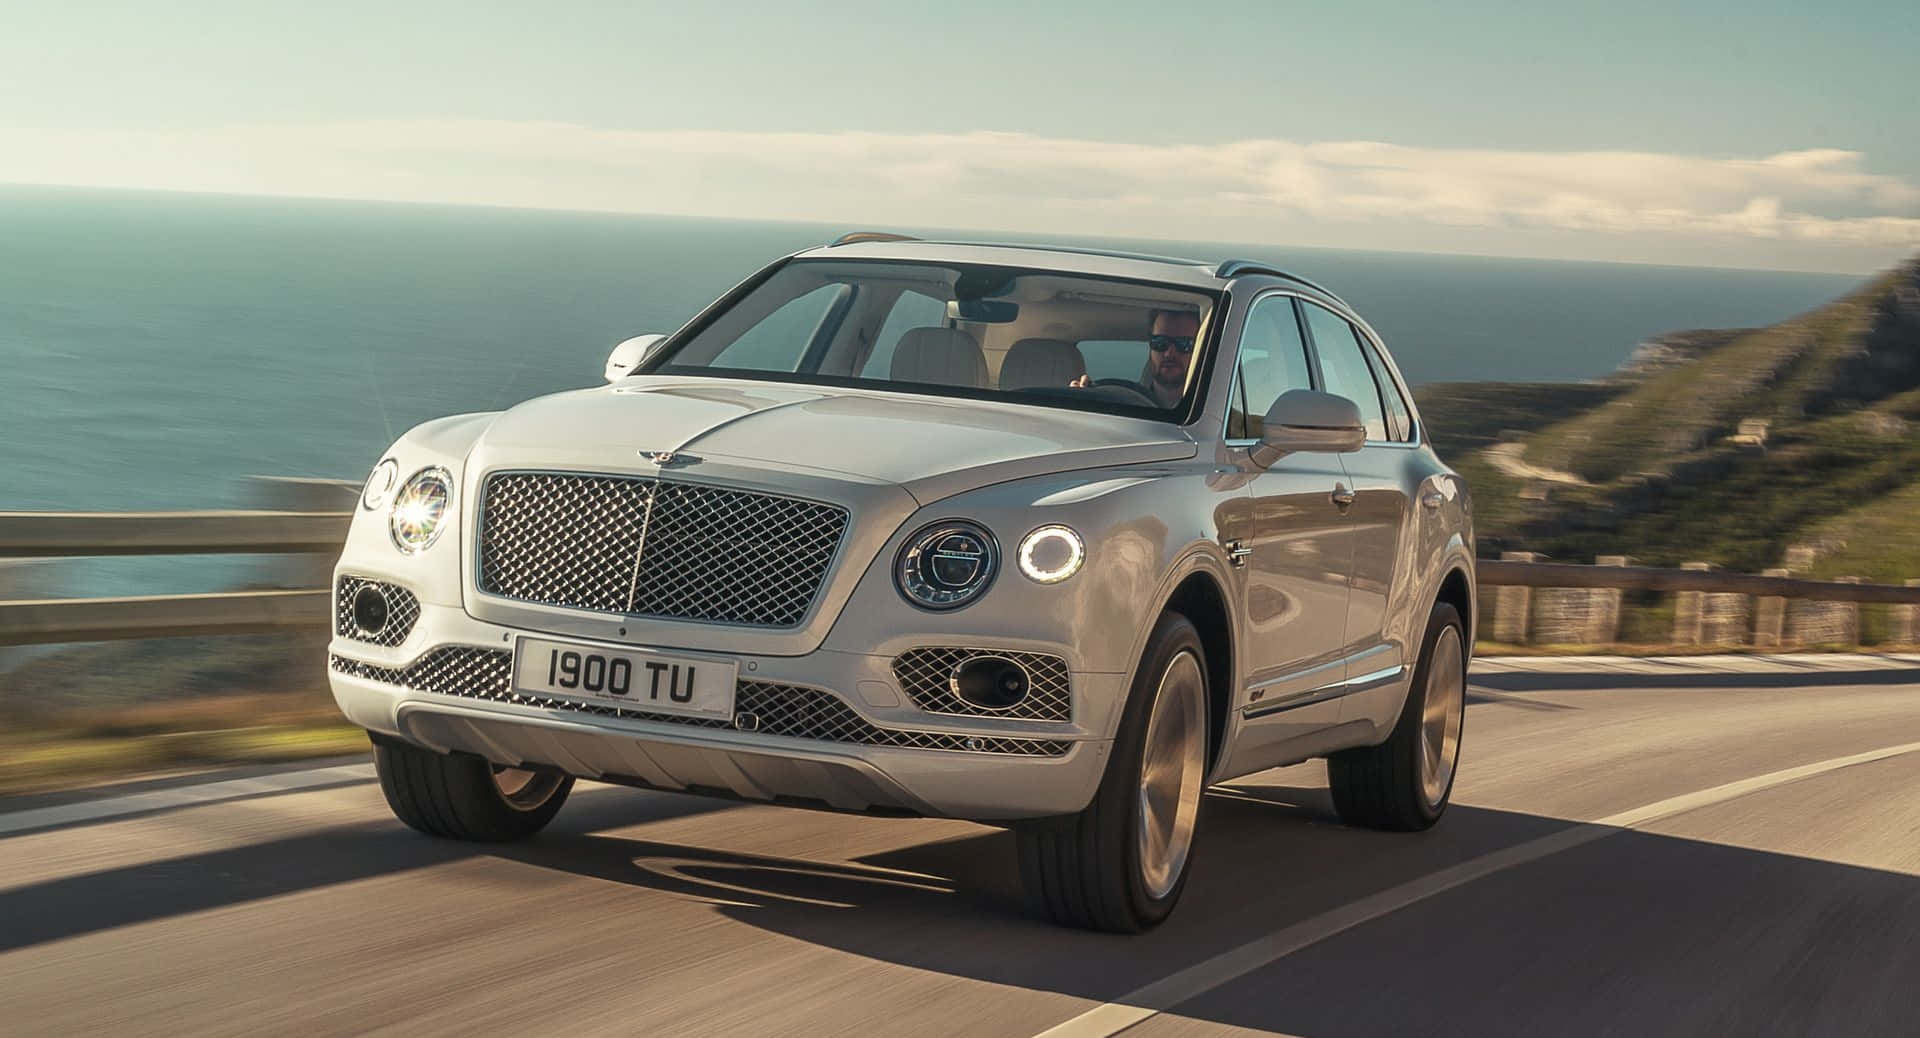 The Bentley Bentayga Is Driving Down A Road